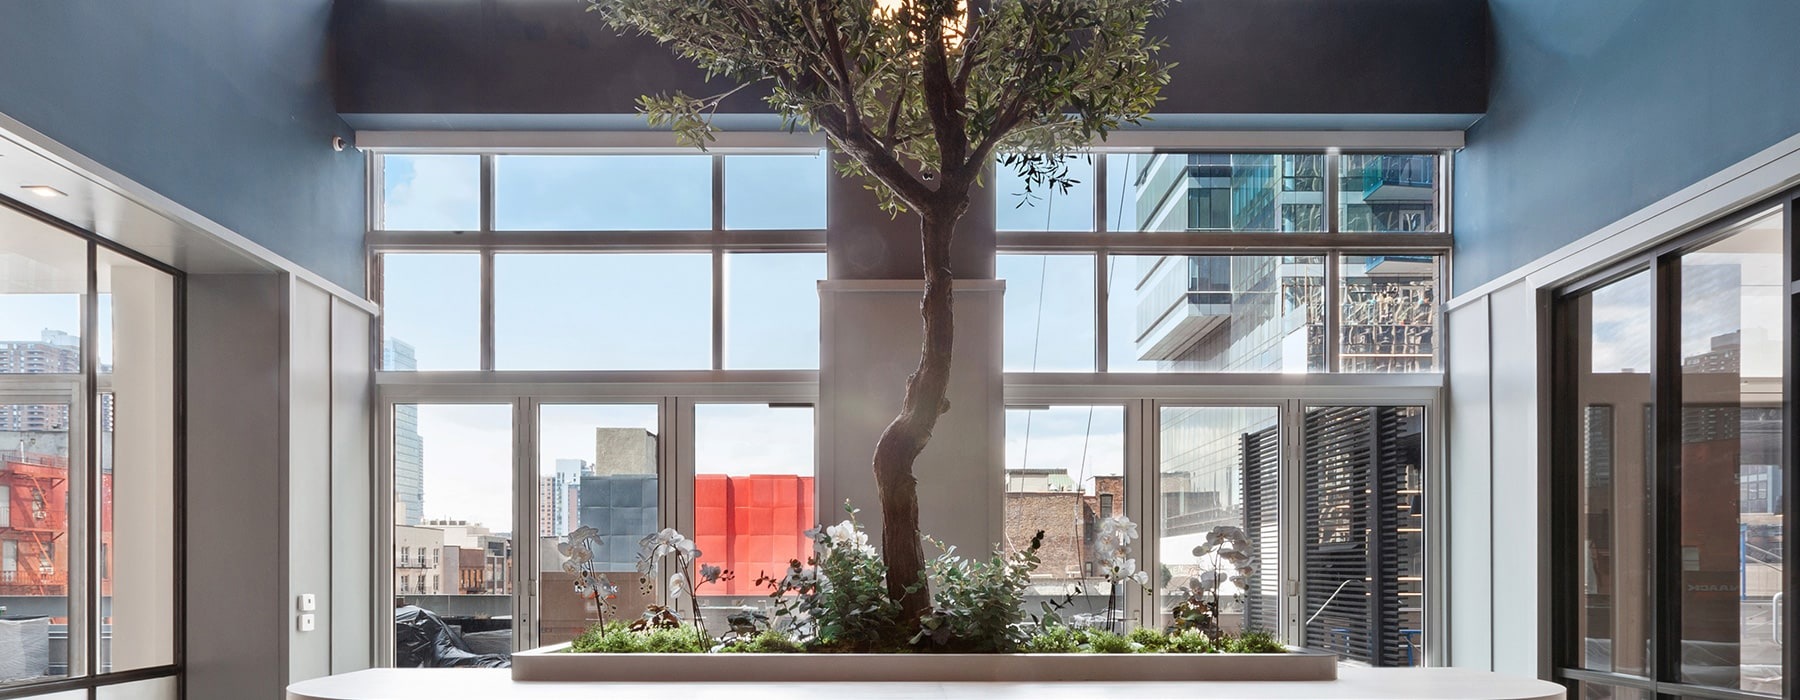 a planted tree amidst an open lobby with high ceilings and connection to amenities